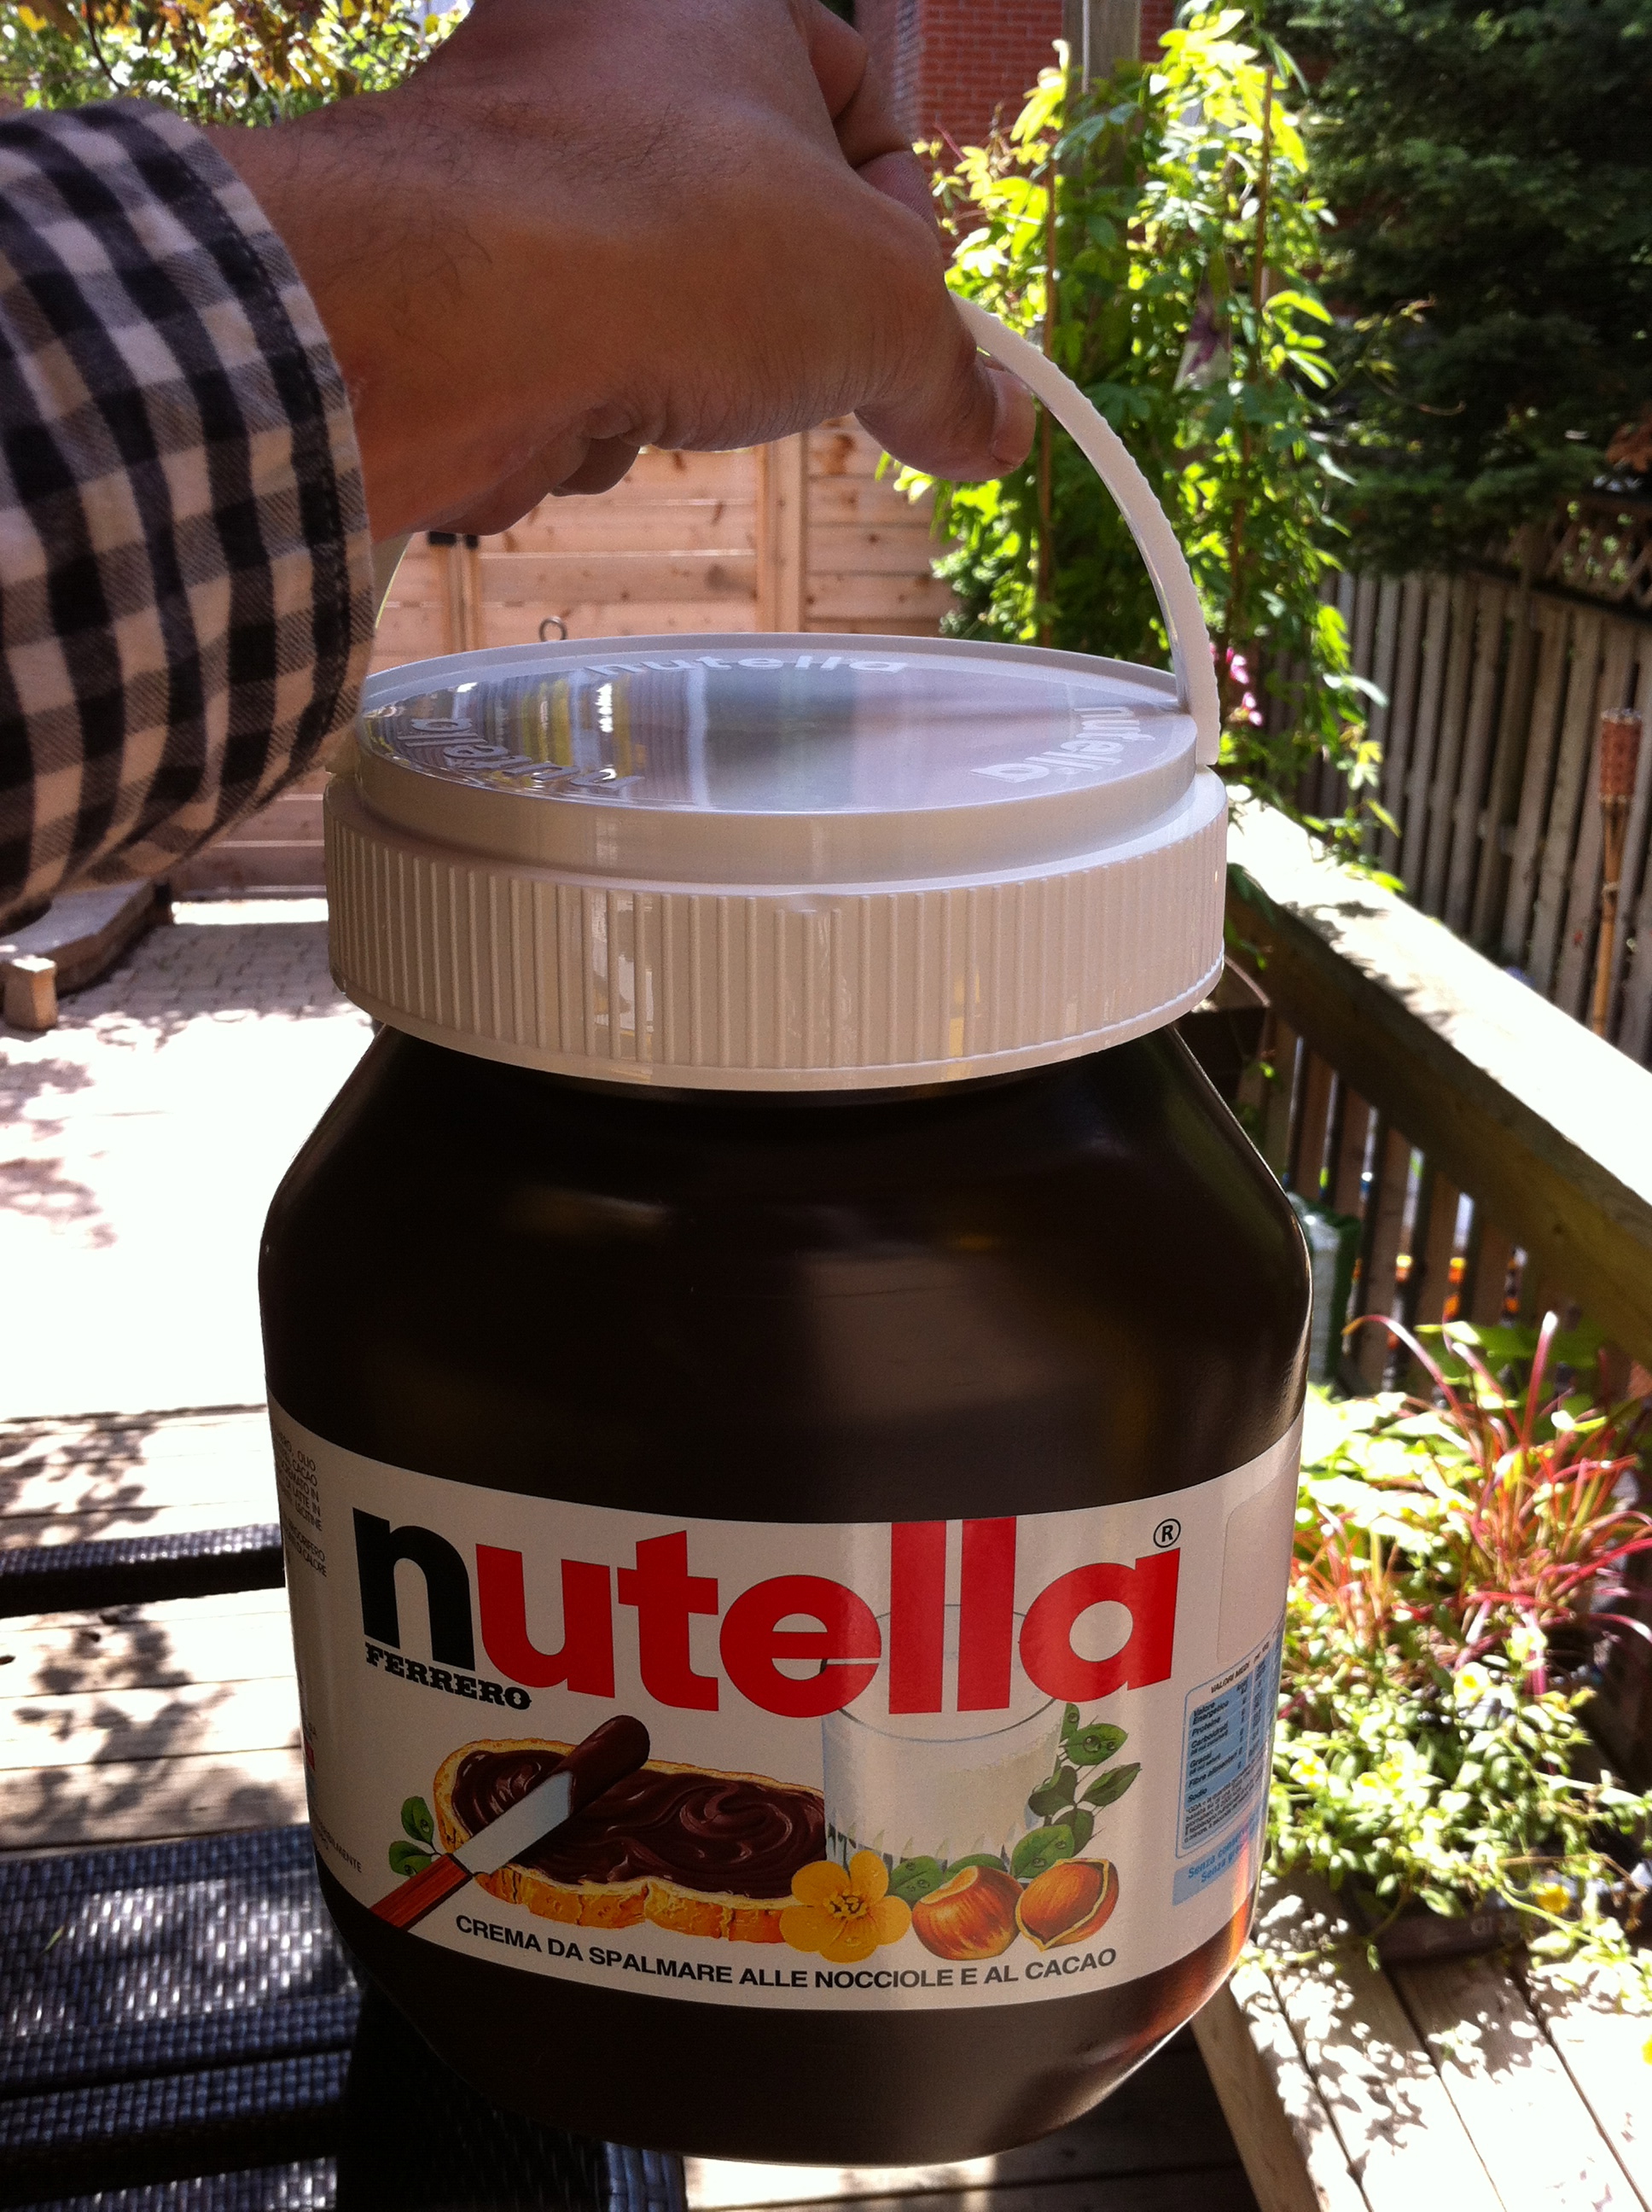 And that's what a 5kg jar of #nutella looks like! Awesome!…